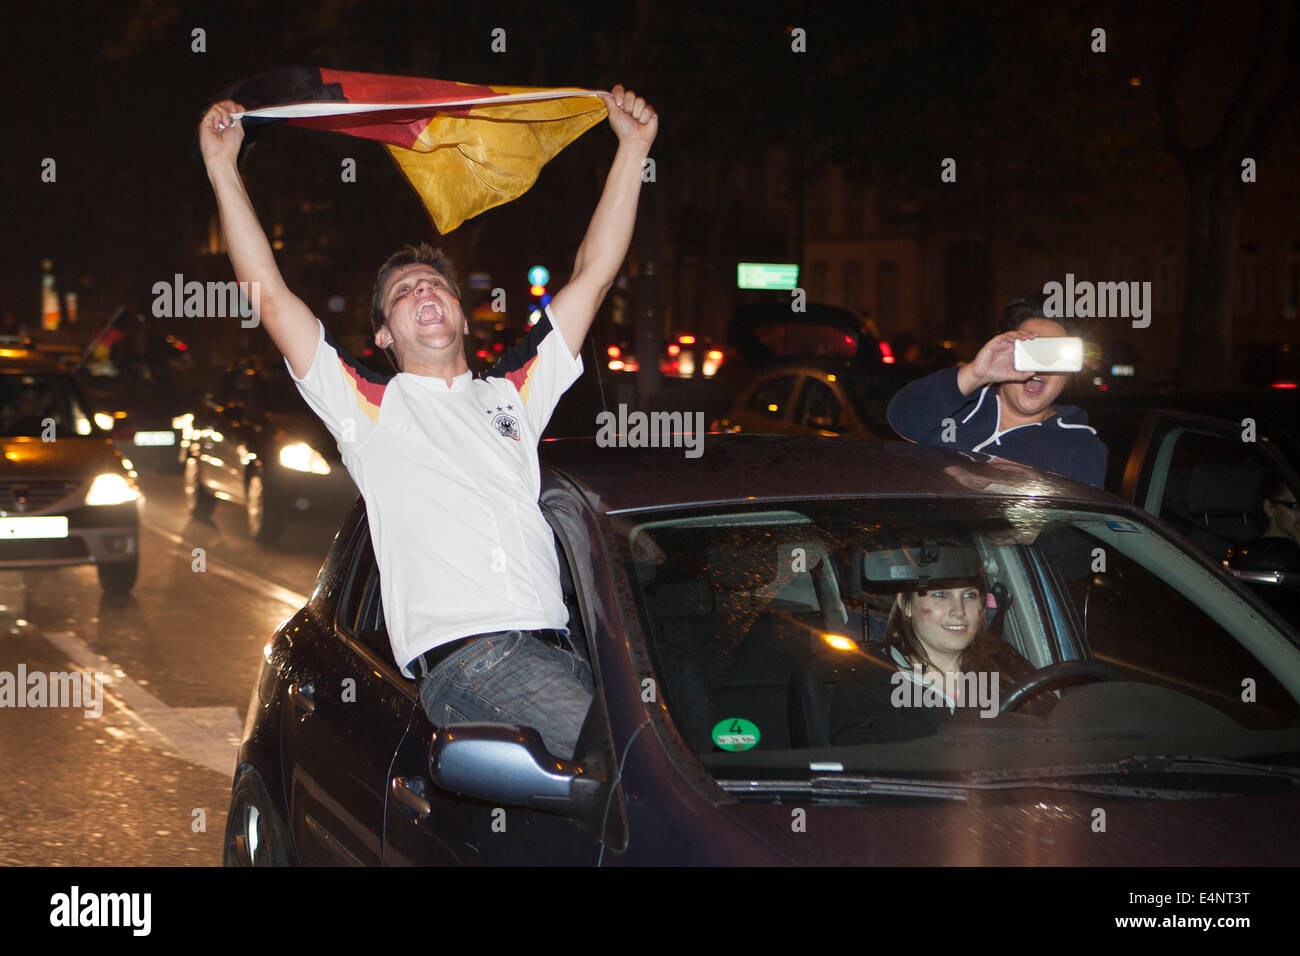 Wiesbaden, Germany. 14th July, 2014. Germany wins the FIFA World Cup 2014. People in their cars and on the street cheering and celebrating in downtown Wiesbaden after Germanys victory over Argentina in the final match. A man with a German flag cheers. Some motion blur. Credit:  Oliver Kessler/Alamy Live News Stock Photo